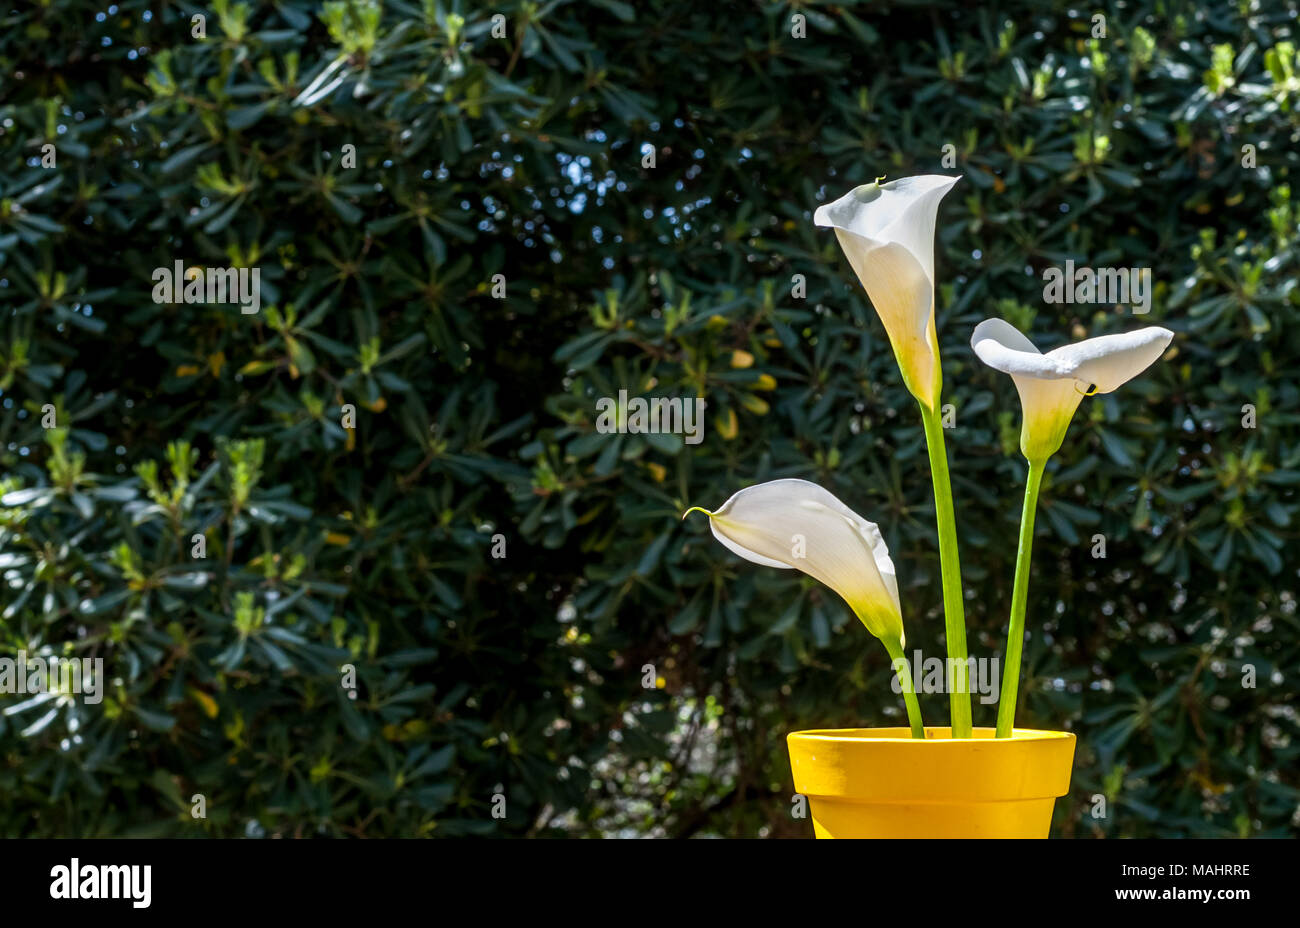 Closeup of three white calla lillies in a garden in a sunny day of spring Stock Photo